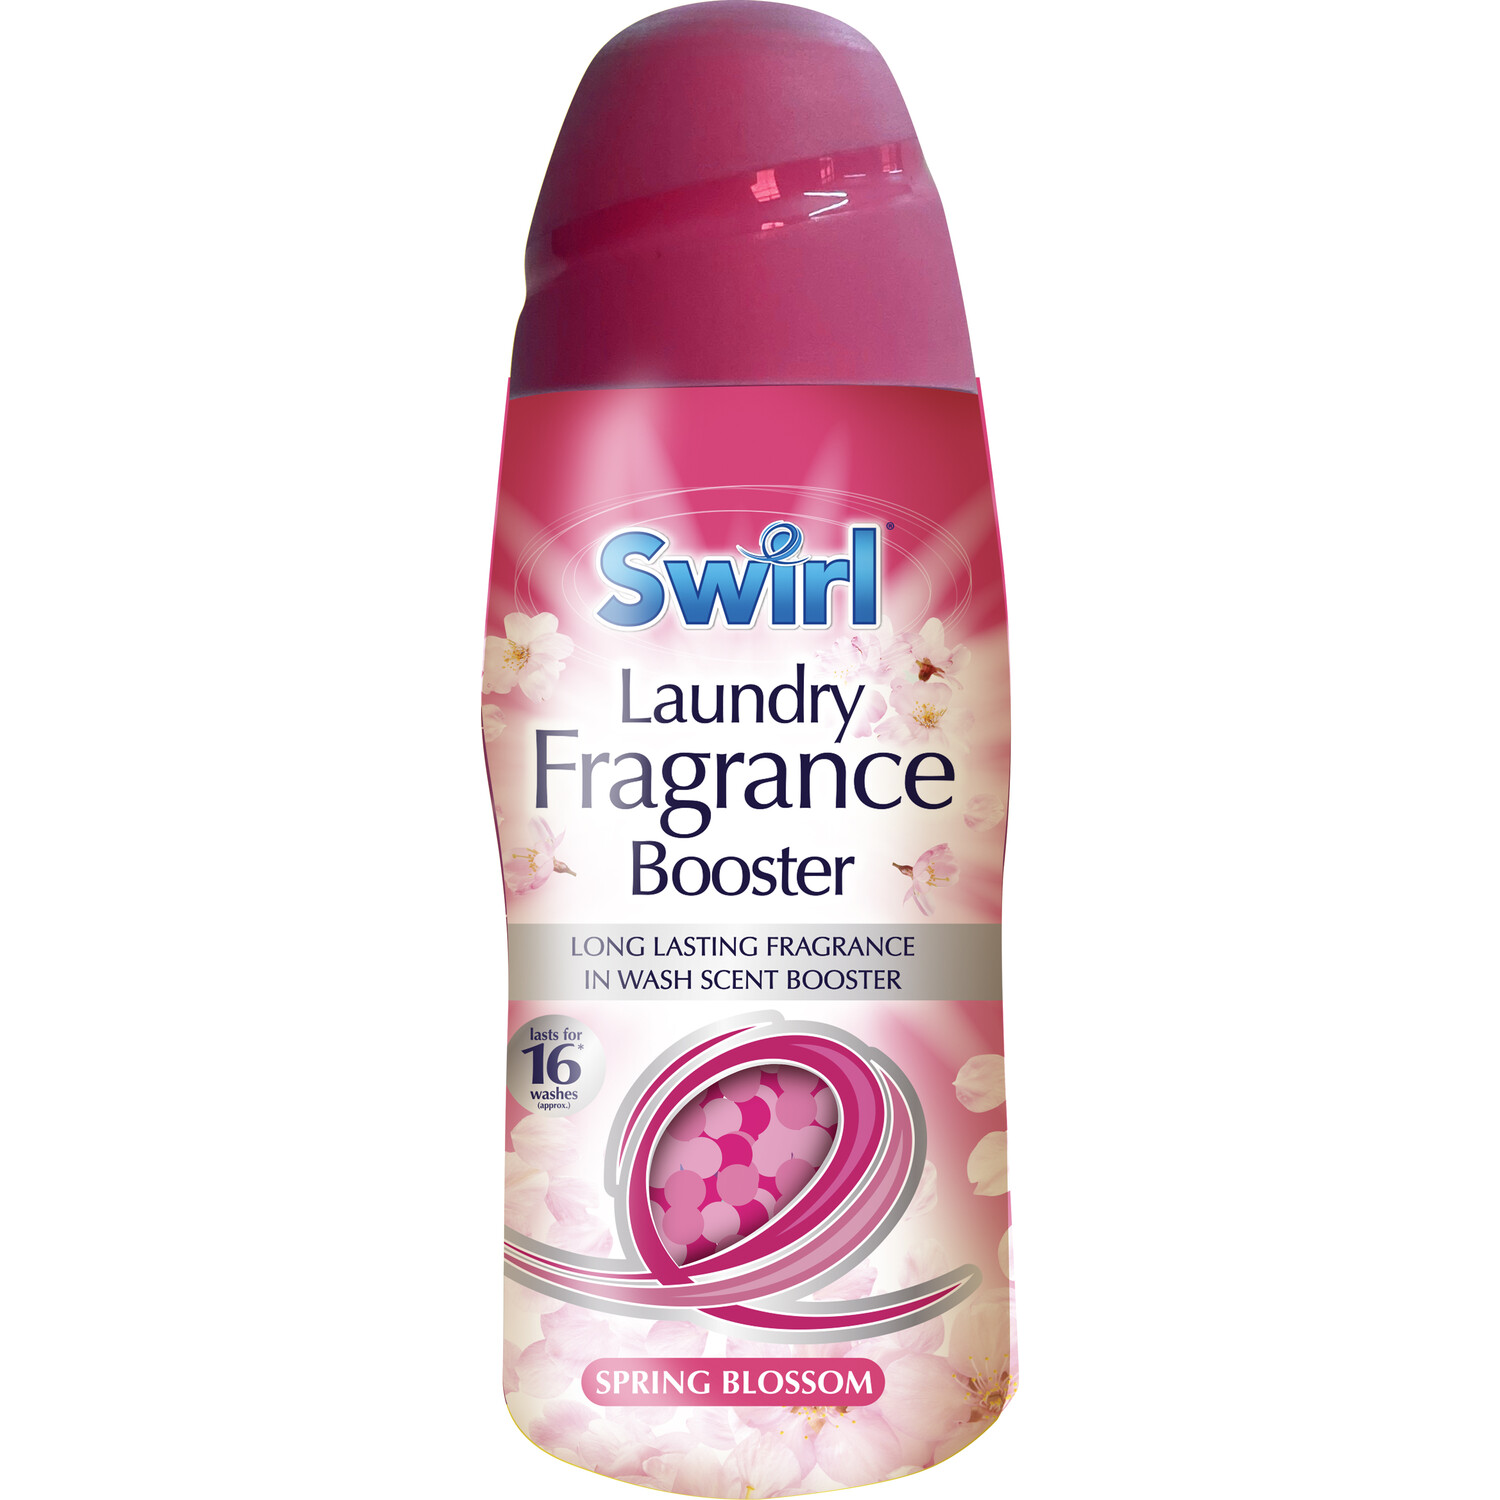 Swirl Spring Blossom Laundry Fragrance Booster 16 Washes 350g Image